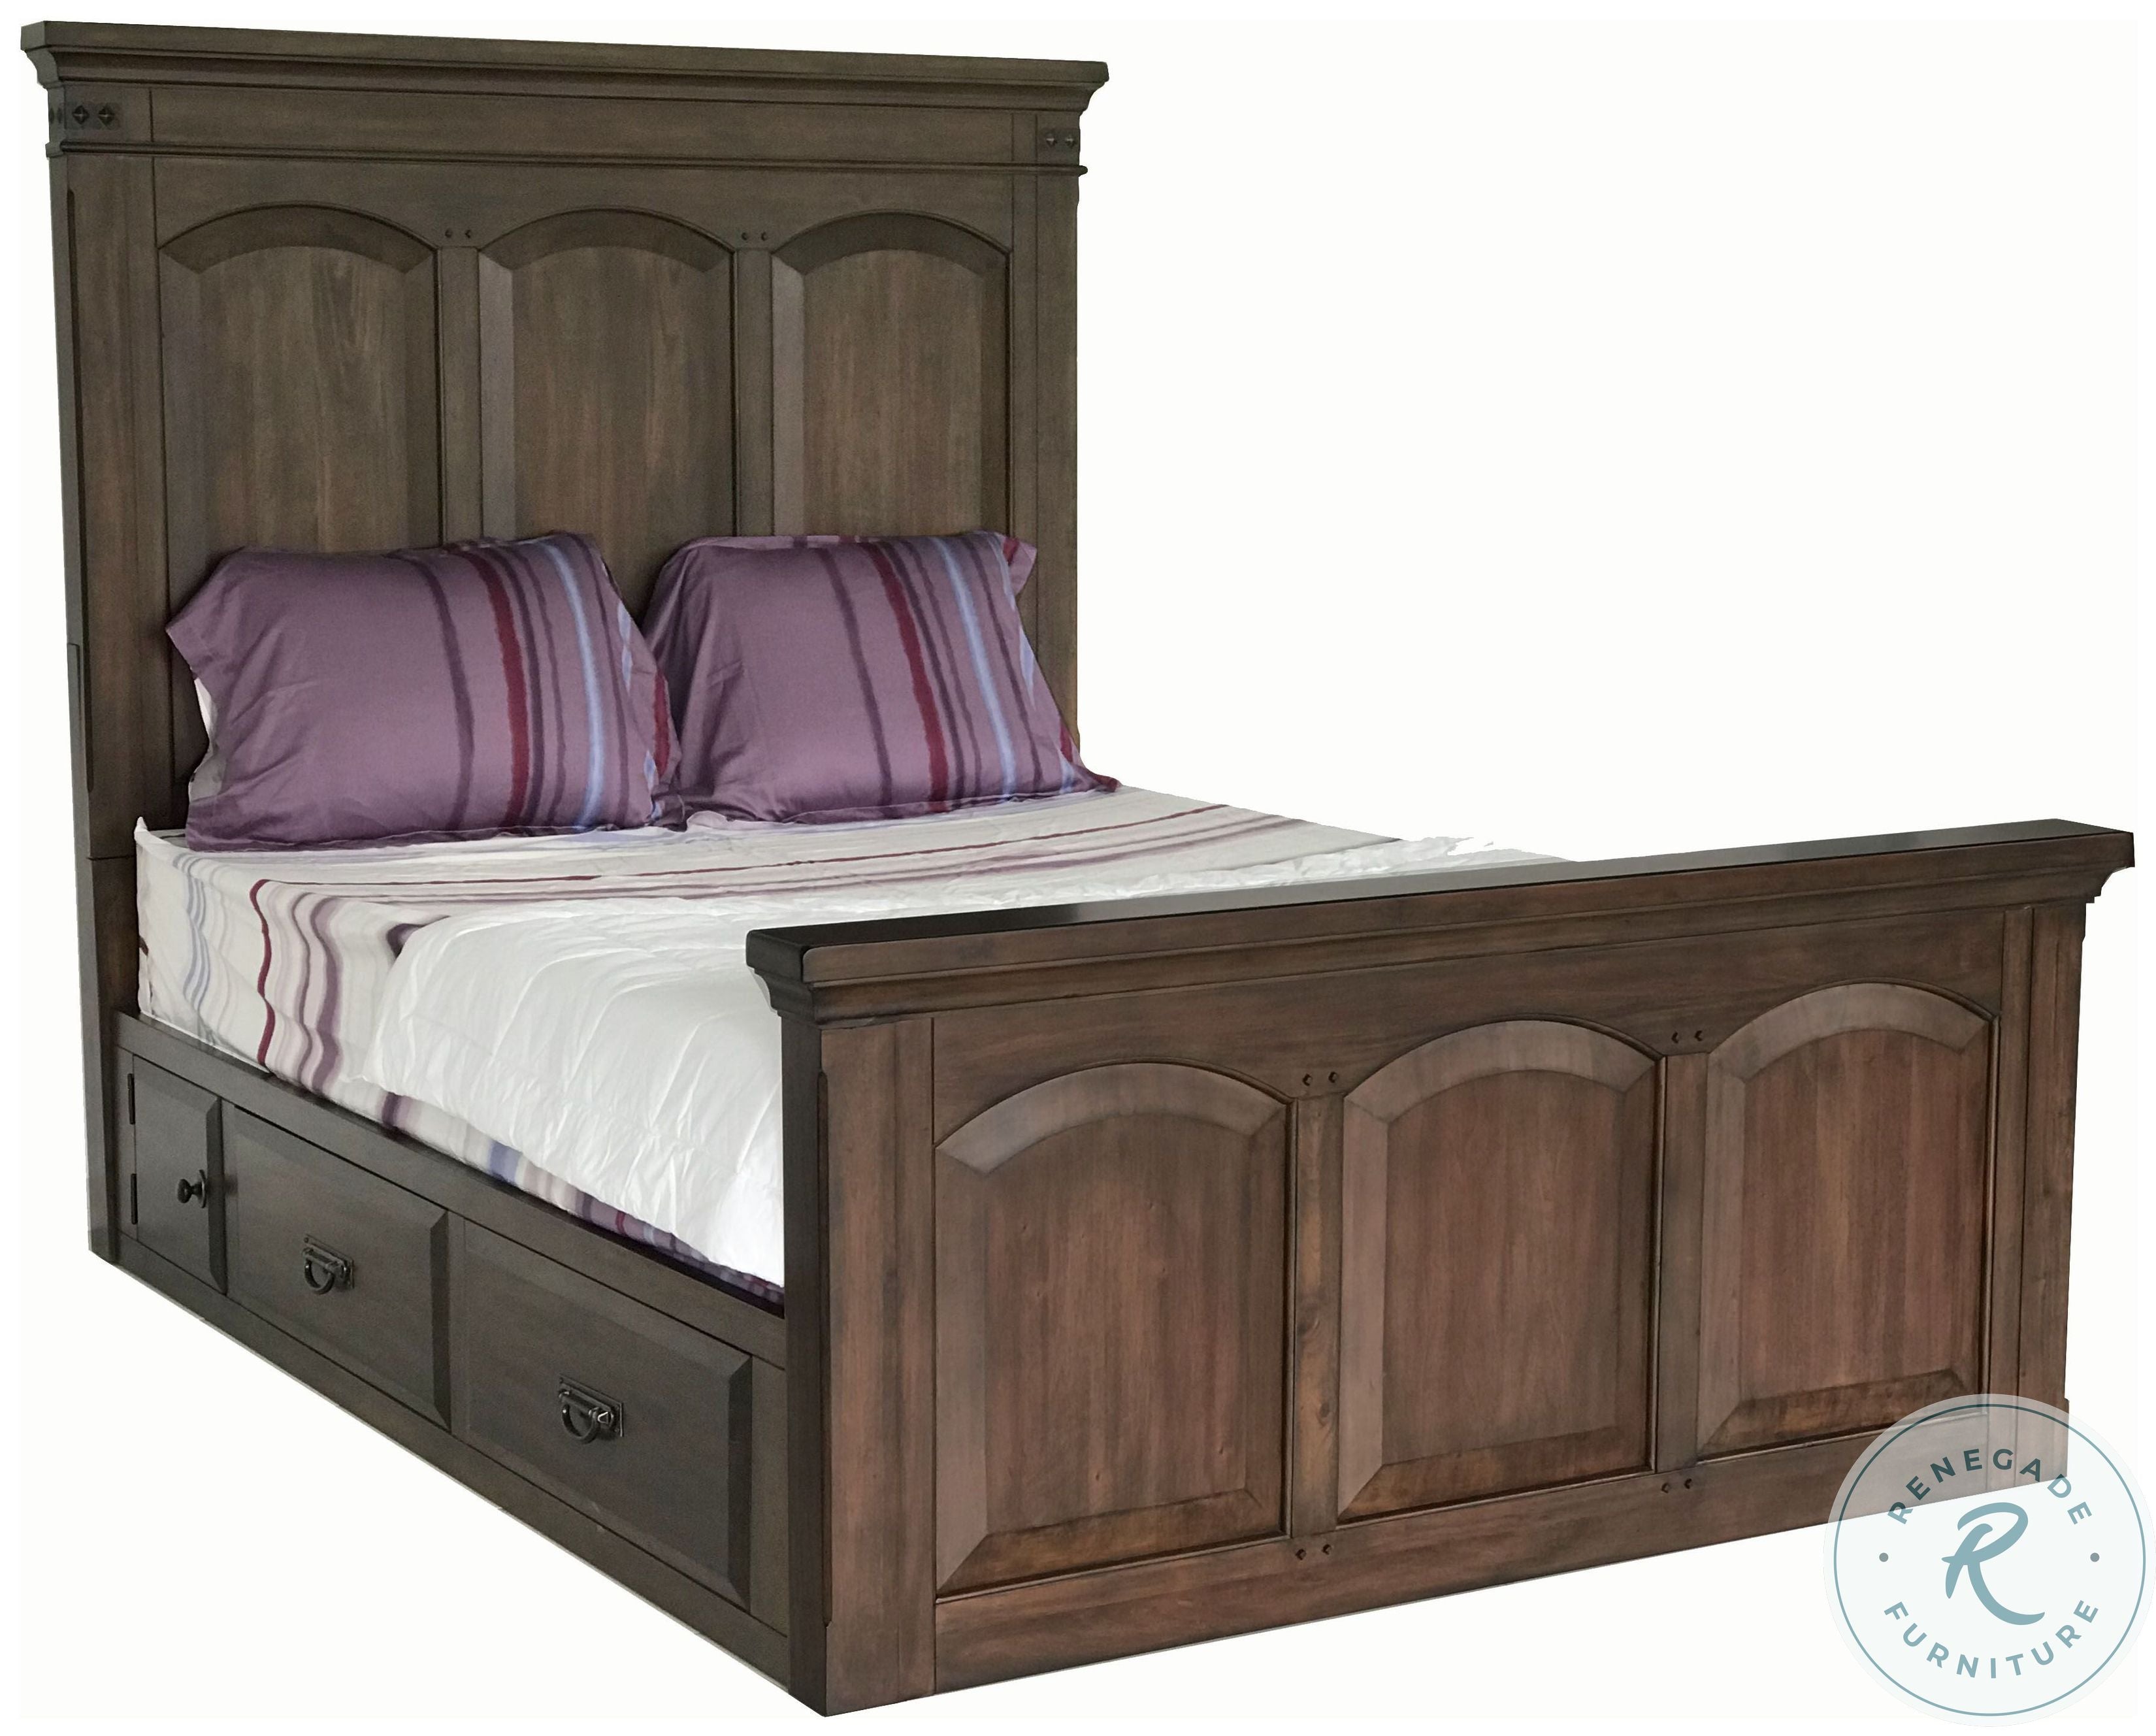 Aspen Village Lightly Distressed Toasted Mahogany King Storage Panel Bed by Avalon Furniture